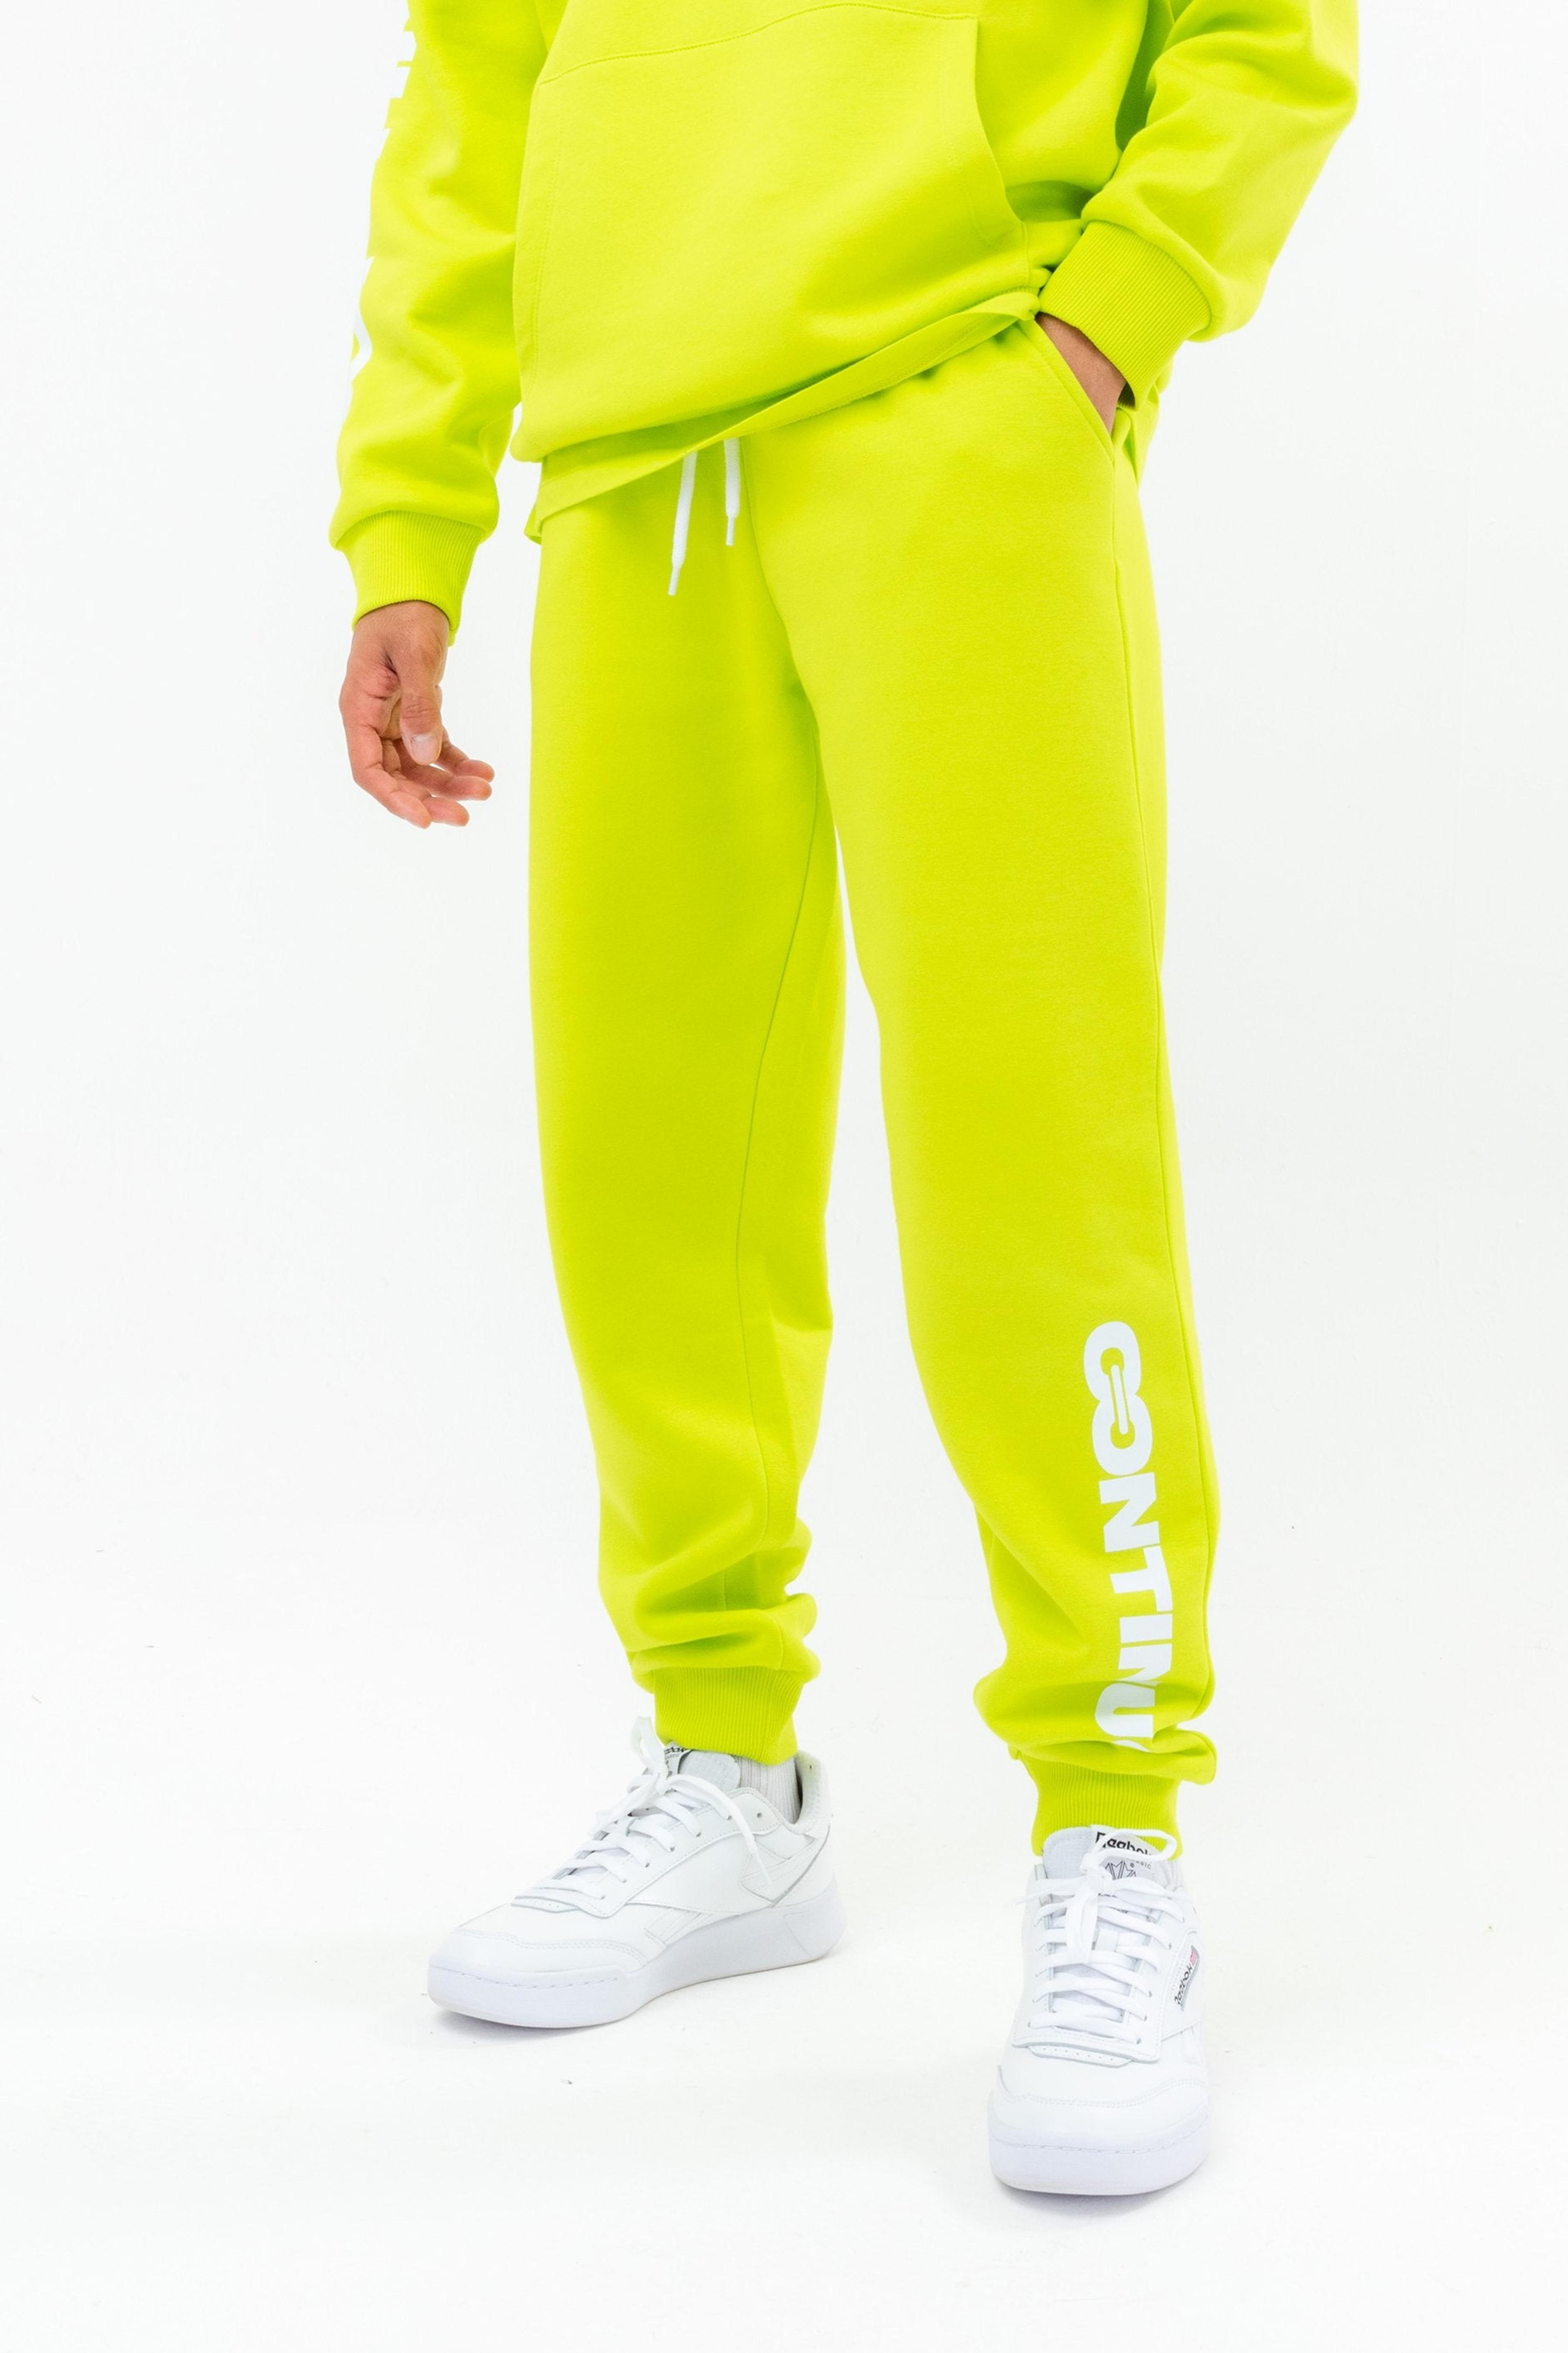 Alternate View 2 of CONTINU8 NEON GREEN JOGGERS